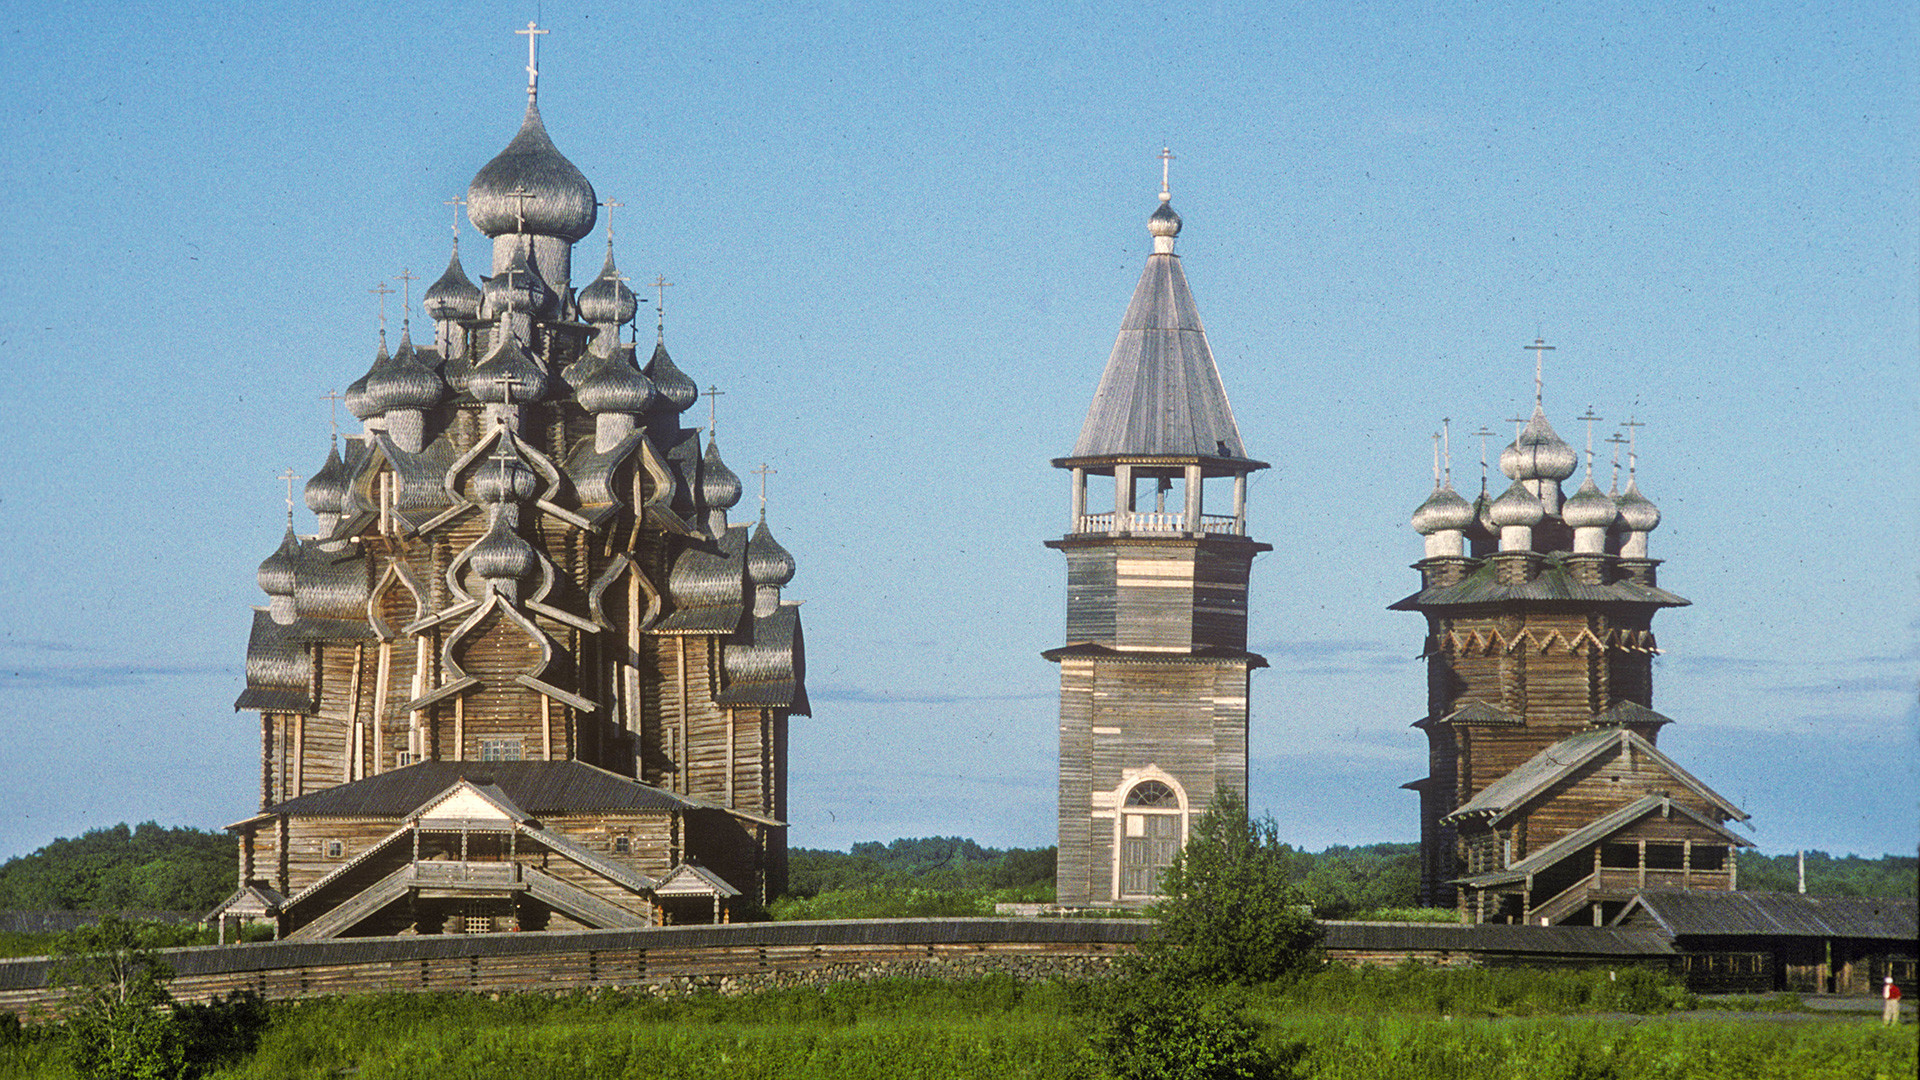 Kizhi Island, church ensemble (pogost). West view from Lake Onega. From left: Church of the Transfiguration, bell tower, Church of the Intercession. July 13, 1993